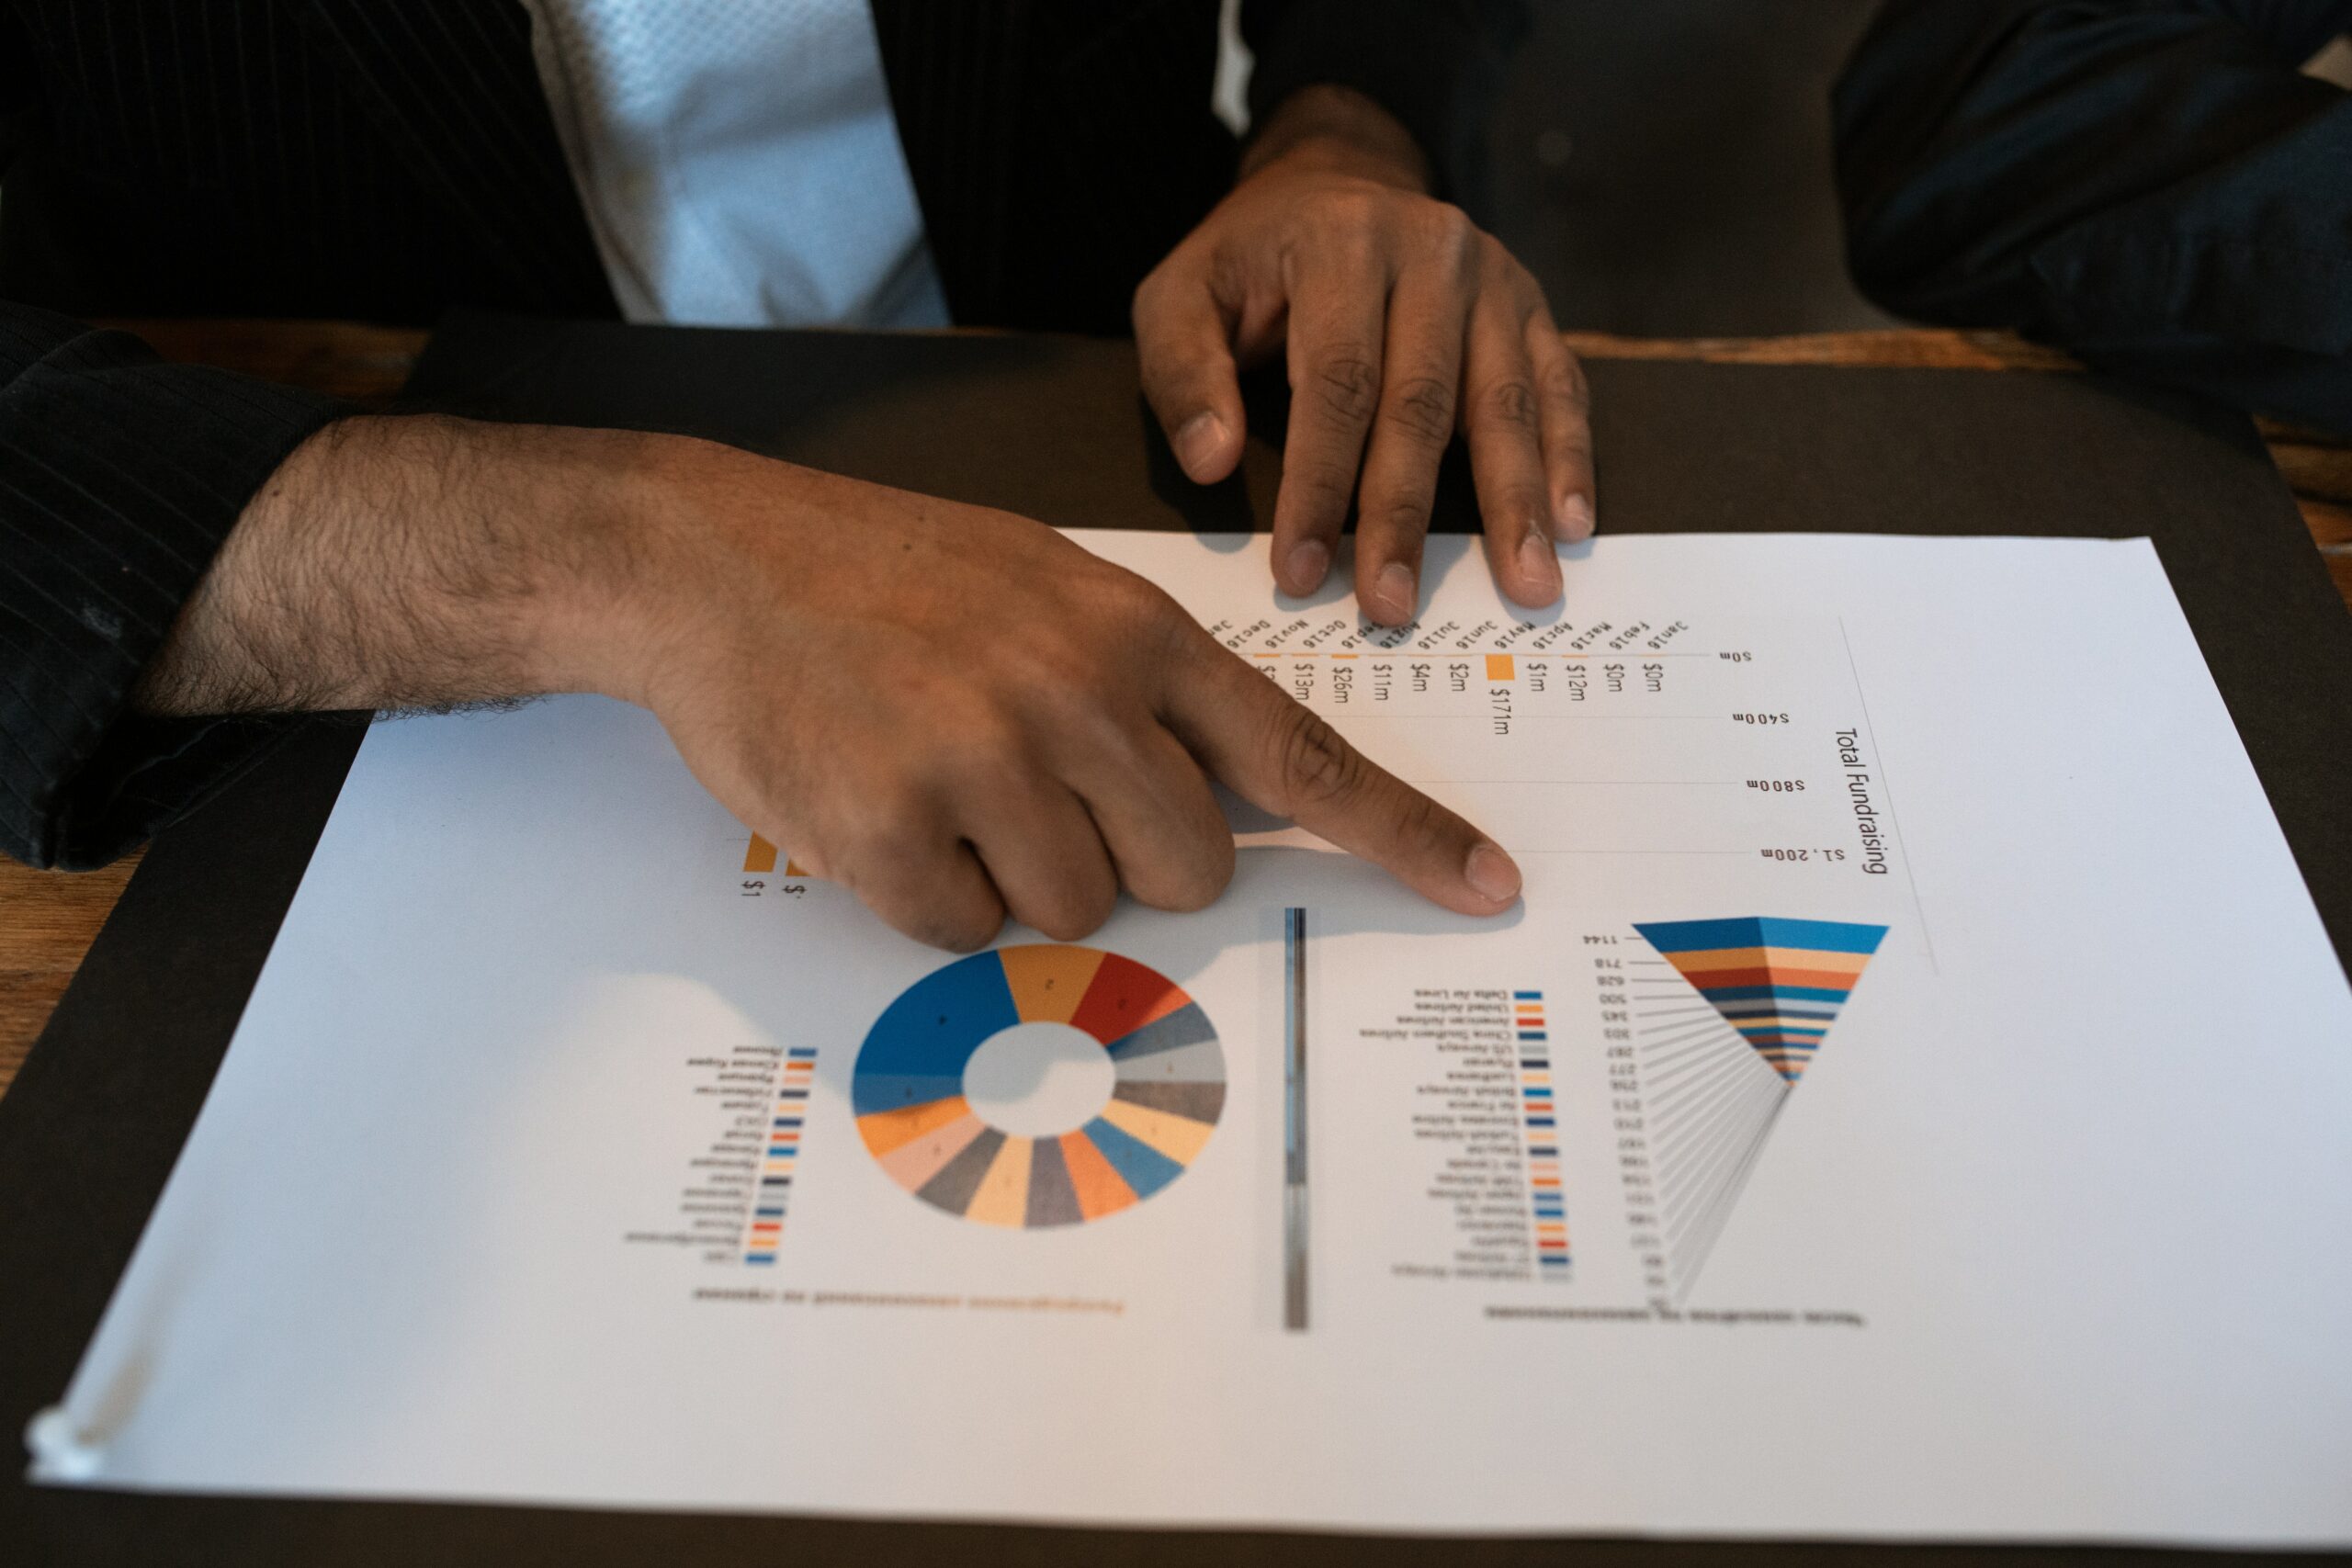 A person pointing at graphs, charts, and other data on a printed sheet.